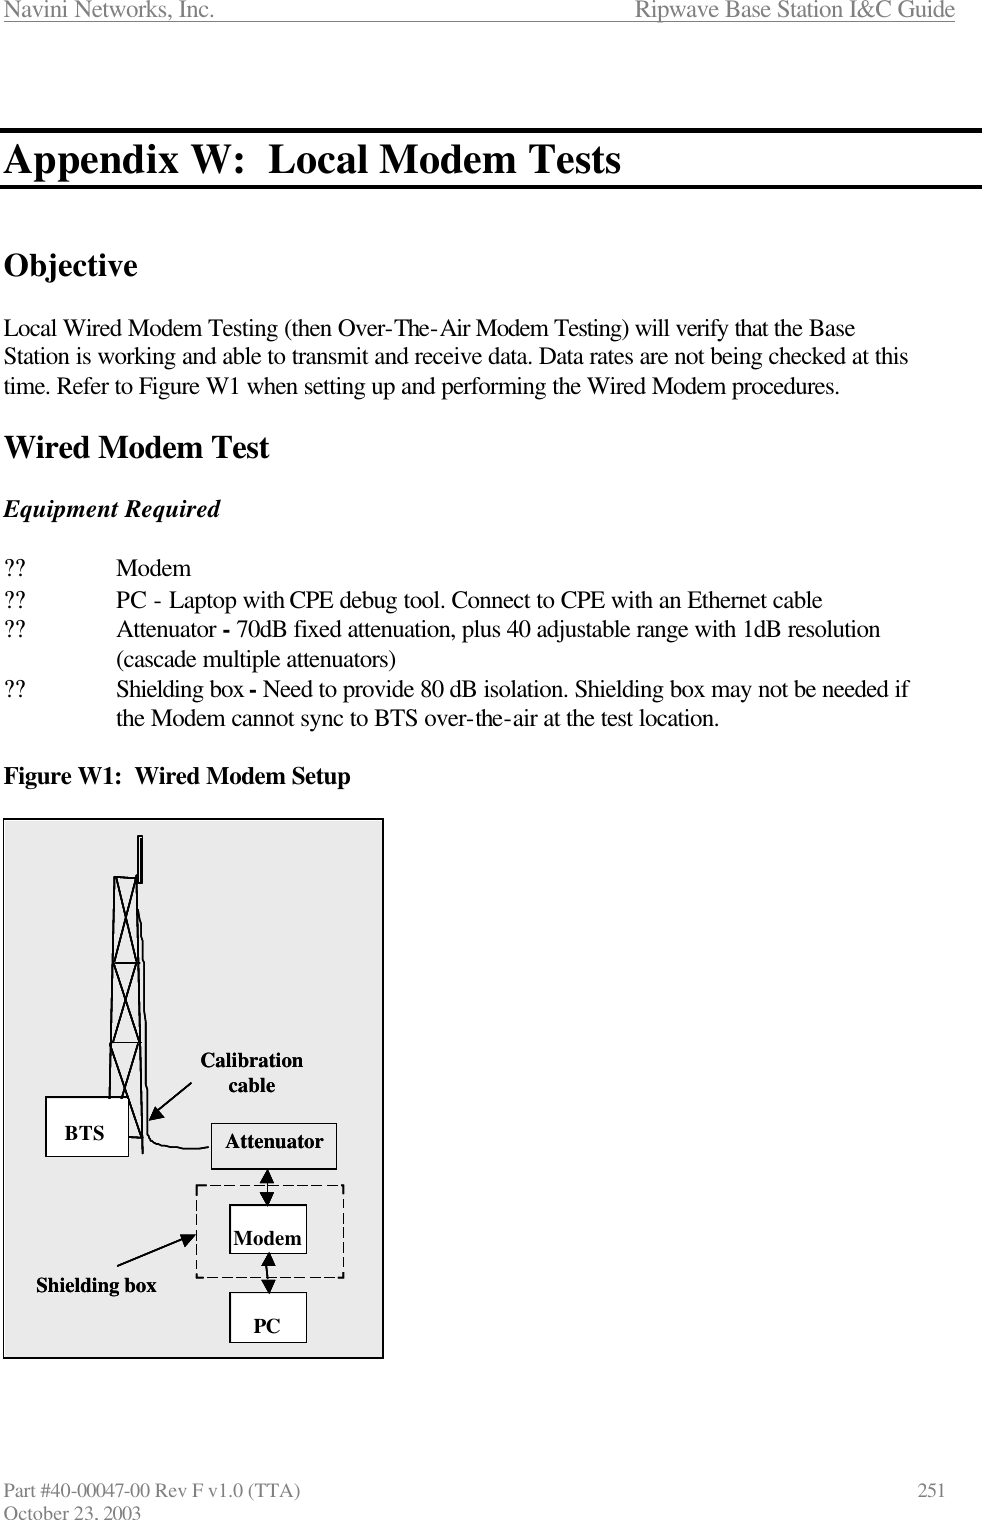 Navini Networks, Inc.                      Ripwave Base Station I&amp;C Guide Part #40-00047-00 Rev F v1.0 (TTA)            251 October 23, 2003   Appendix W:  Local Modem Tests   Objective  Local Wired Modem Testing (then Over-The-Air Modem Testing) will verify that the Base Station is working and able to transmit and receive data. Data rates are not being checked at this time. Refer to Figure W1 when setting up and performing the Wired Modem procedures.  Wired Modem Test  Equipment Required  ?? Modem    ?? PC - Laptop with CPE debug tool. Connect to CPE with an Ethernet cable ?? Attenuator - 70dB fixed attenuation, plus 40 adjustable range with 1dB resolution  (cascade multiple attenuators) ?? Shielding box - Need to provide 80 dB isolation. Shielding box may not be needed if   the Modem cannot sync to BTS over-the-air at the test location.   Figure W1:  Wired Modem Setup  CPEPCAttenuatorShielding boxBTSCalibration cableModemPCAttenuatorShielding boxBTSCalibration cableCPEPCAttenuatorShielding boxBTSCalibration cableModemPCAttenuatorShielding boxBTSCalibration cableModemPCAttenuatorShielding boxBTSCalibration cable